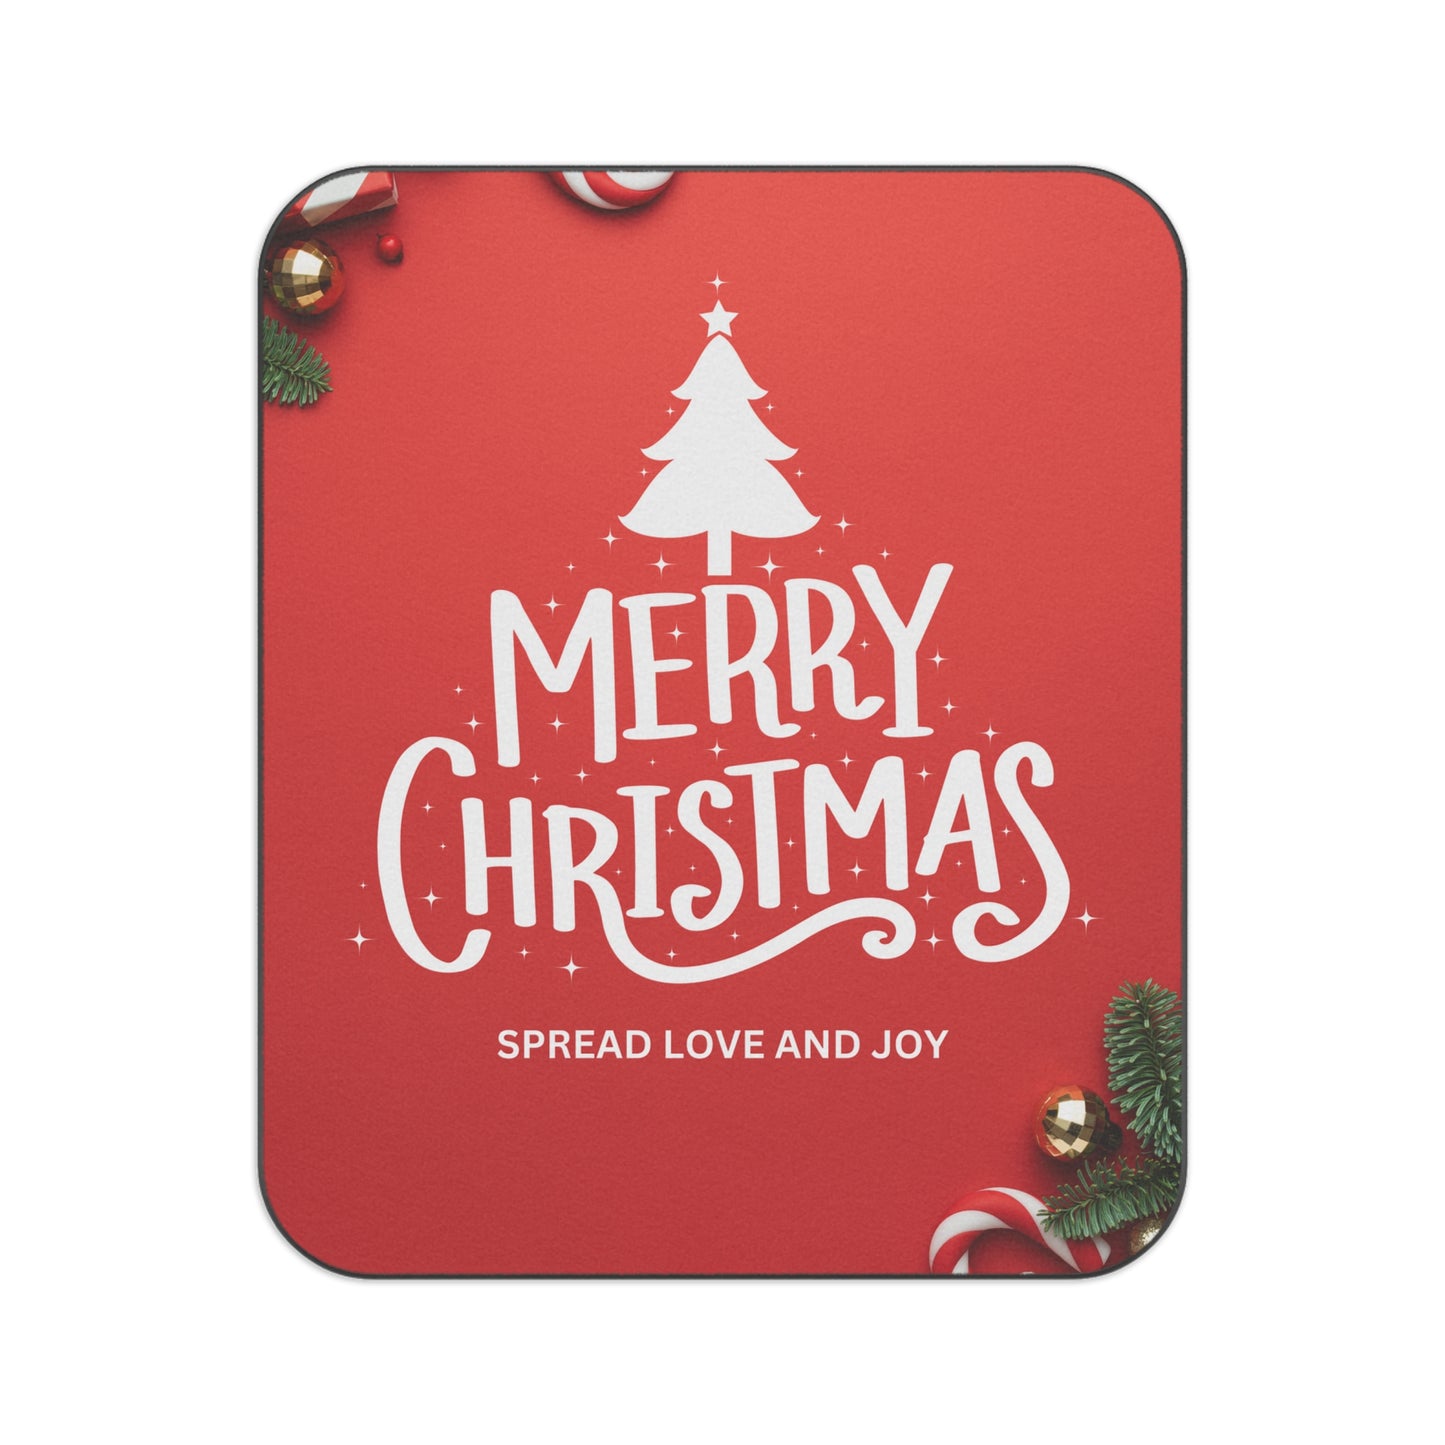 Merry Christmas with Spread Love and Joy Printed Picnic Blanket